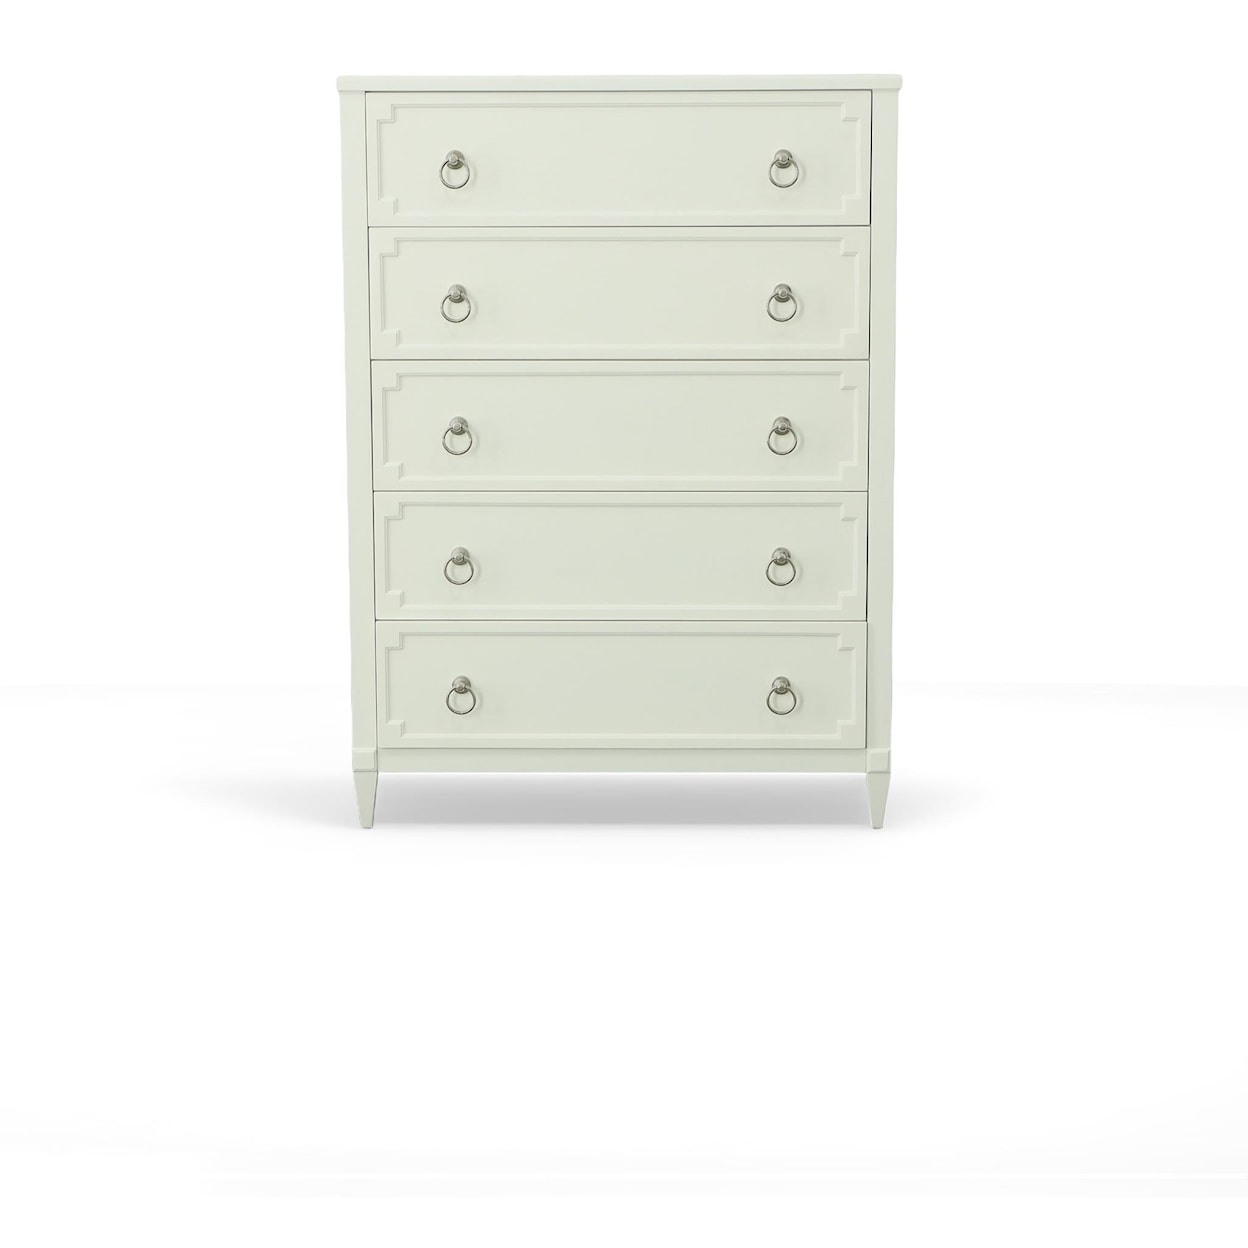 My Home Furnishings Whitehaven Drawer Chest